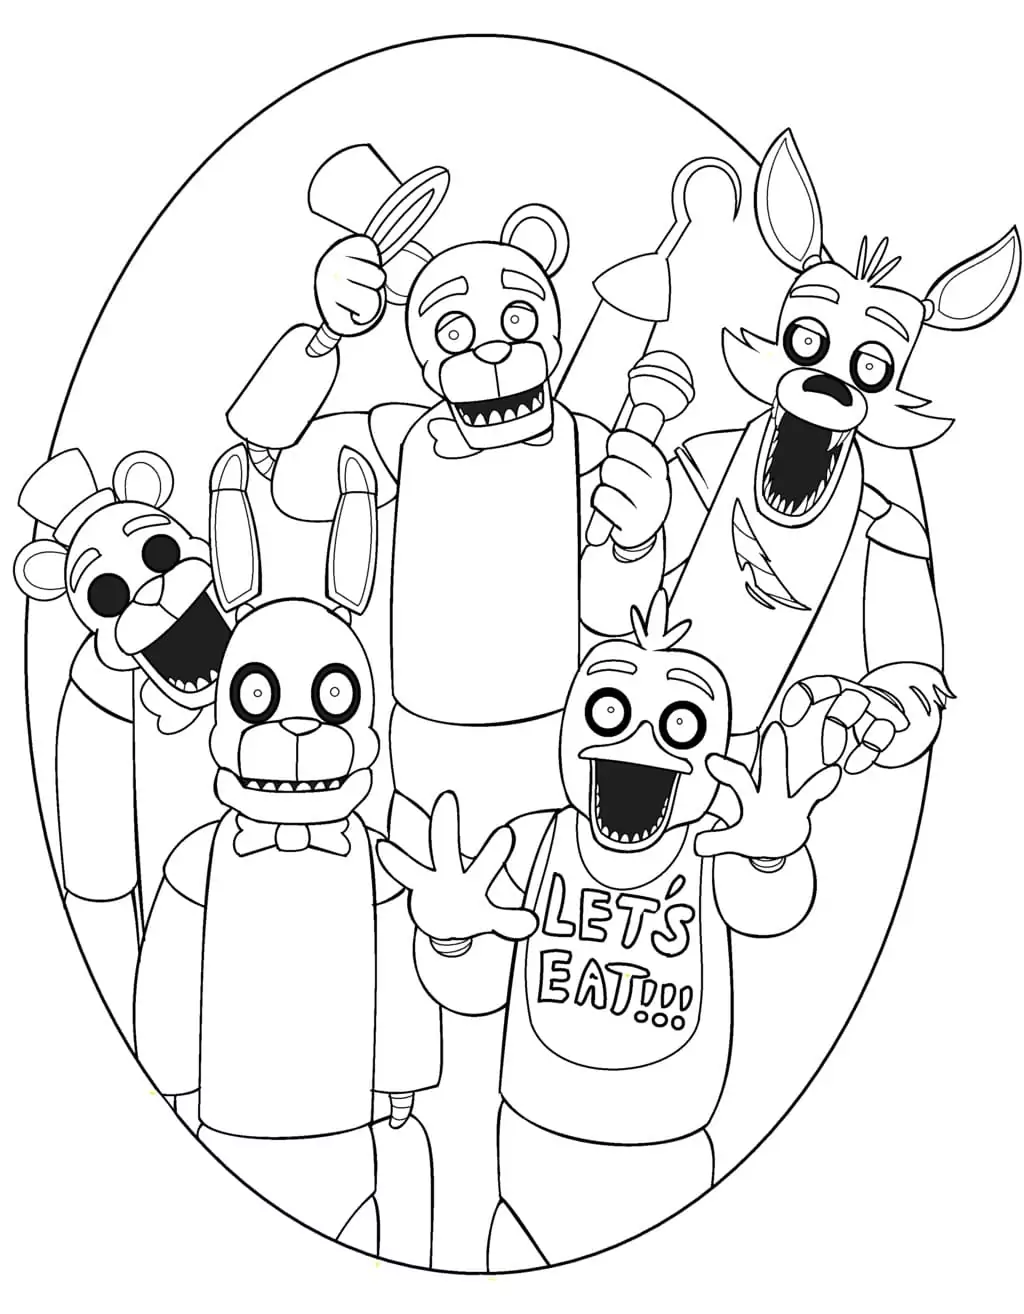 Characters in FNAF